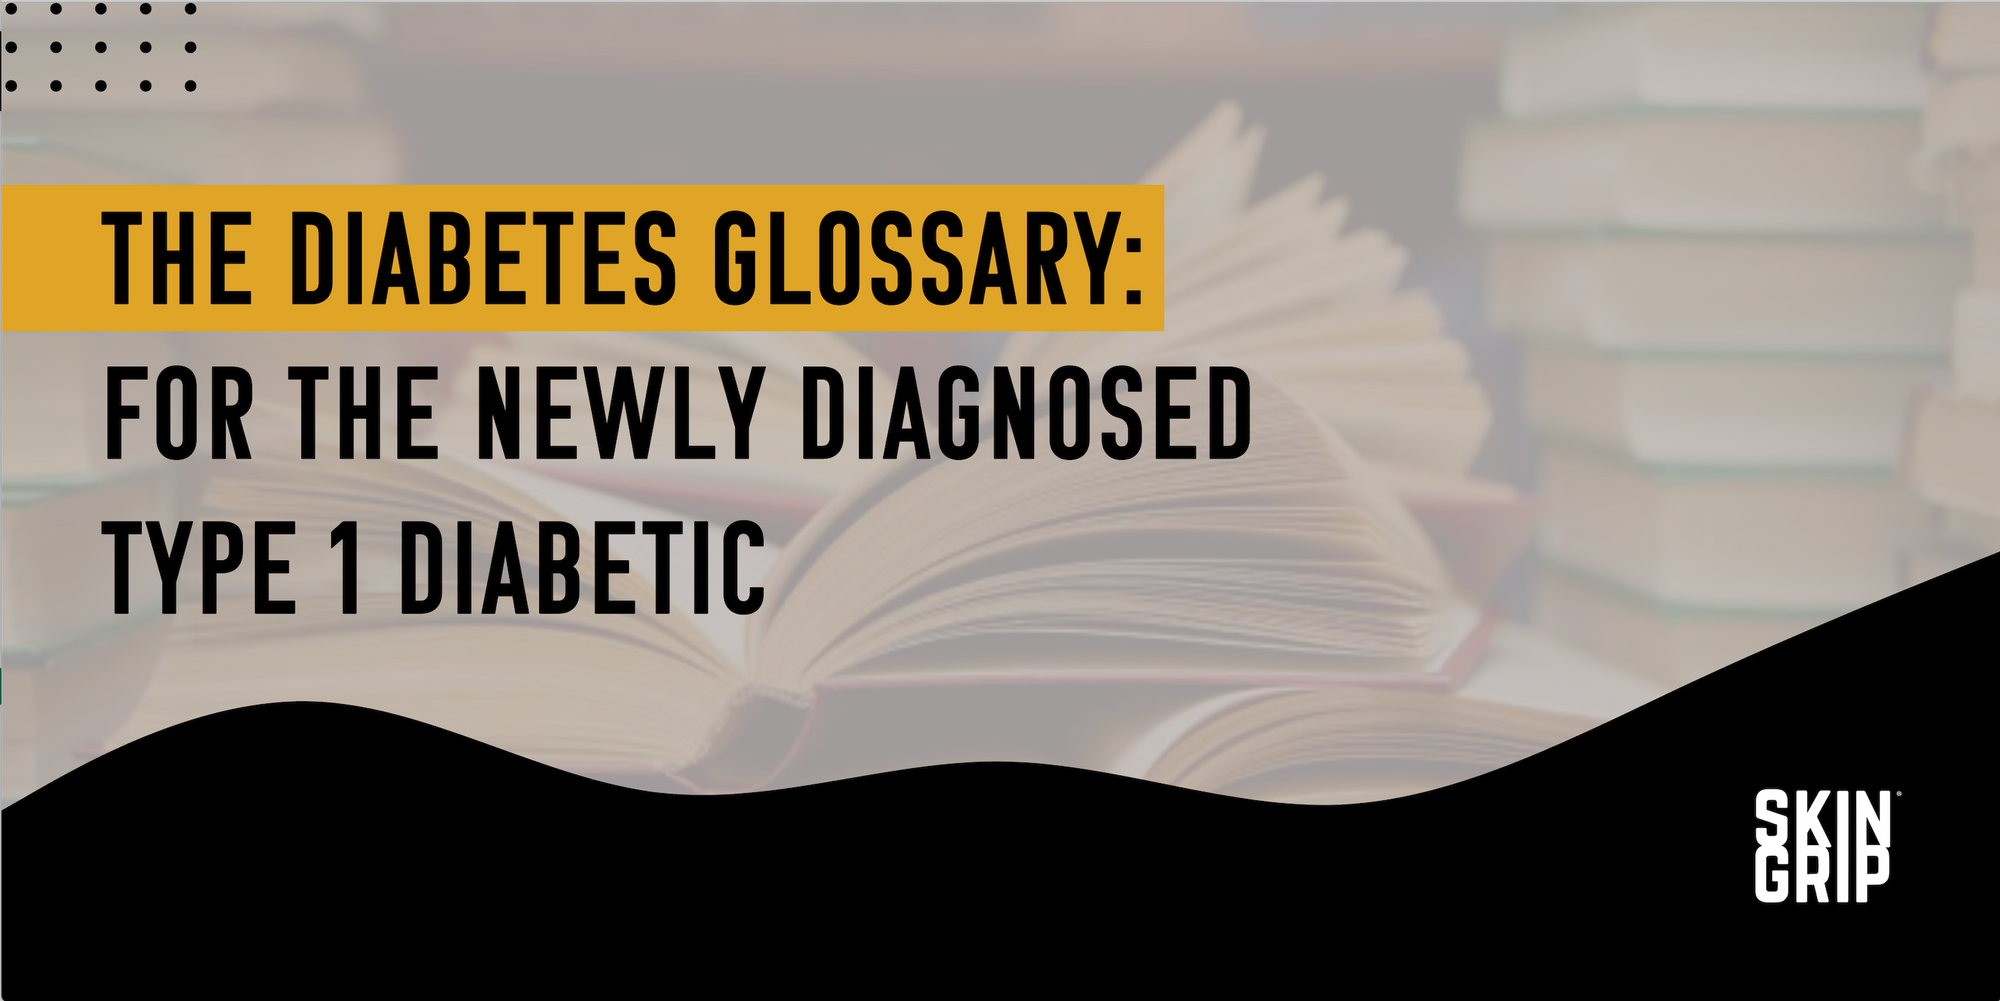 The Diabetes Glossary: For the Newly Diagnosed Type 1 Diabetic